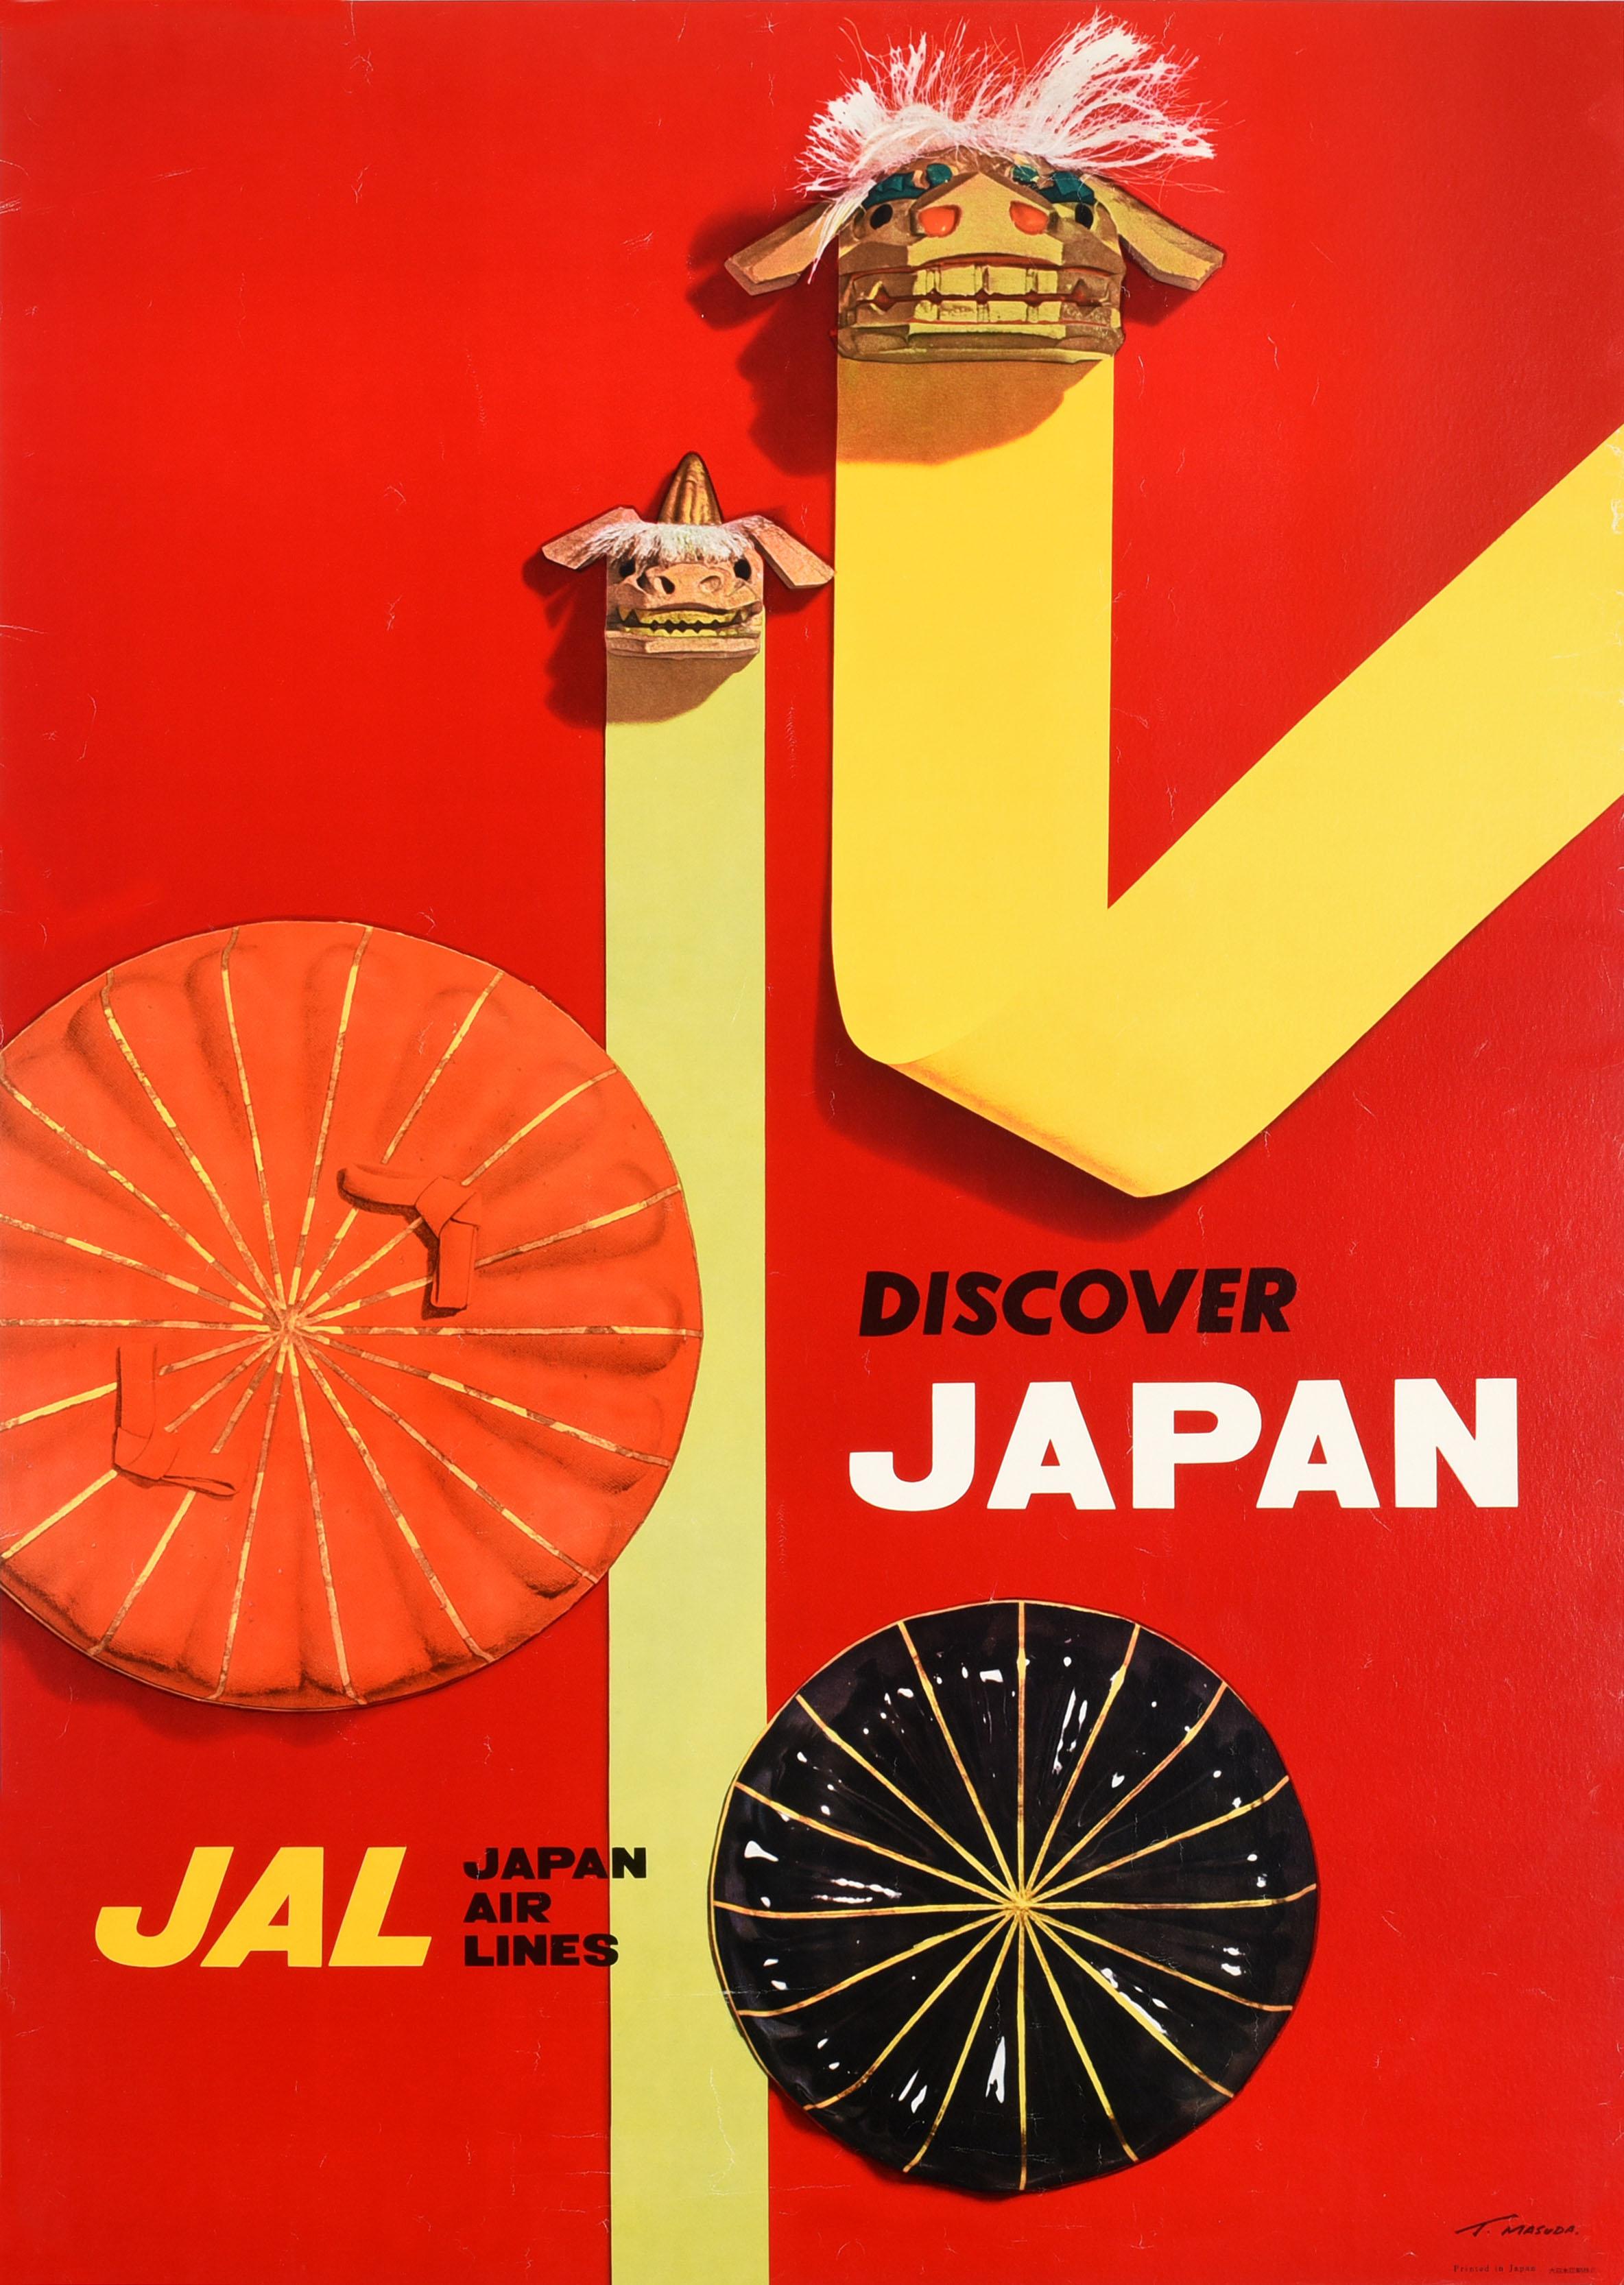 Original vintage travel poster - Discover Japan - featuring a great graphic design depicting two Japanese lion dogs on yellow ribbon lines against a red background with the bold lettering on the sides issued by Japan Airlines JAL. Established in